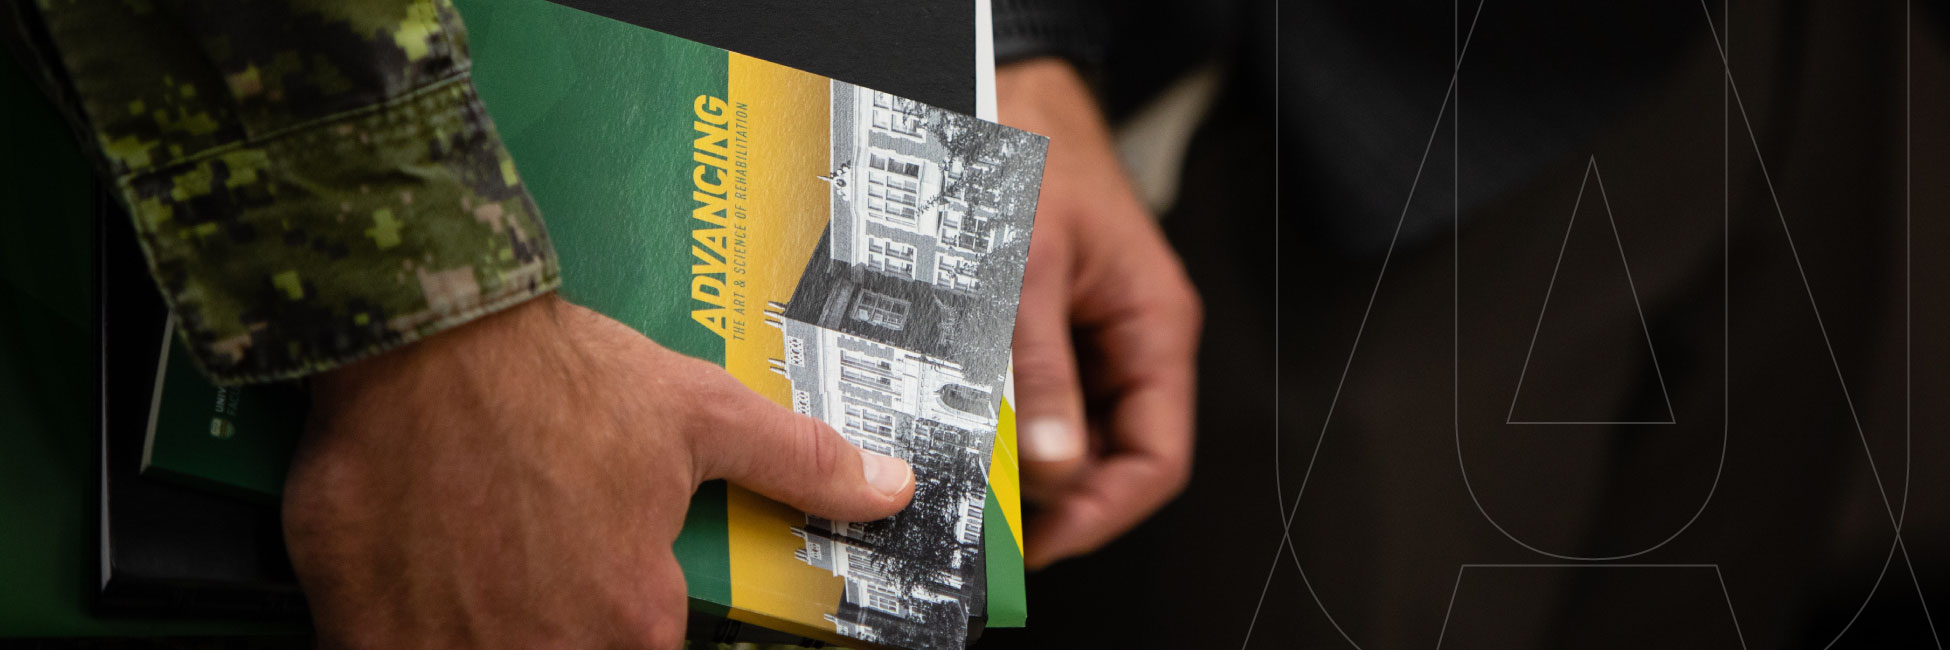 Close up image of hands holding a brochure. The arm is wearing an army jacket. 